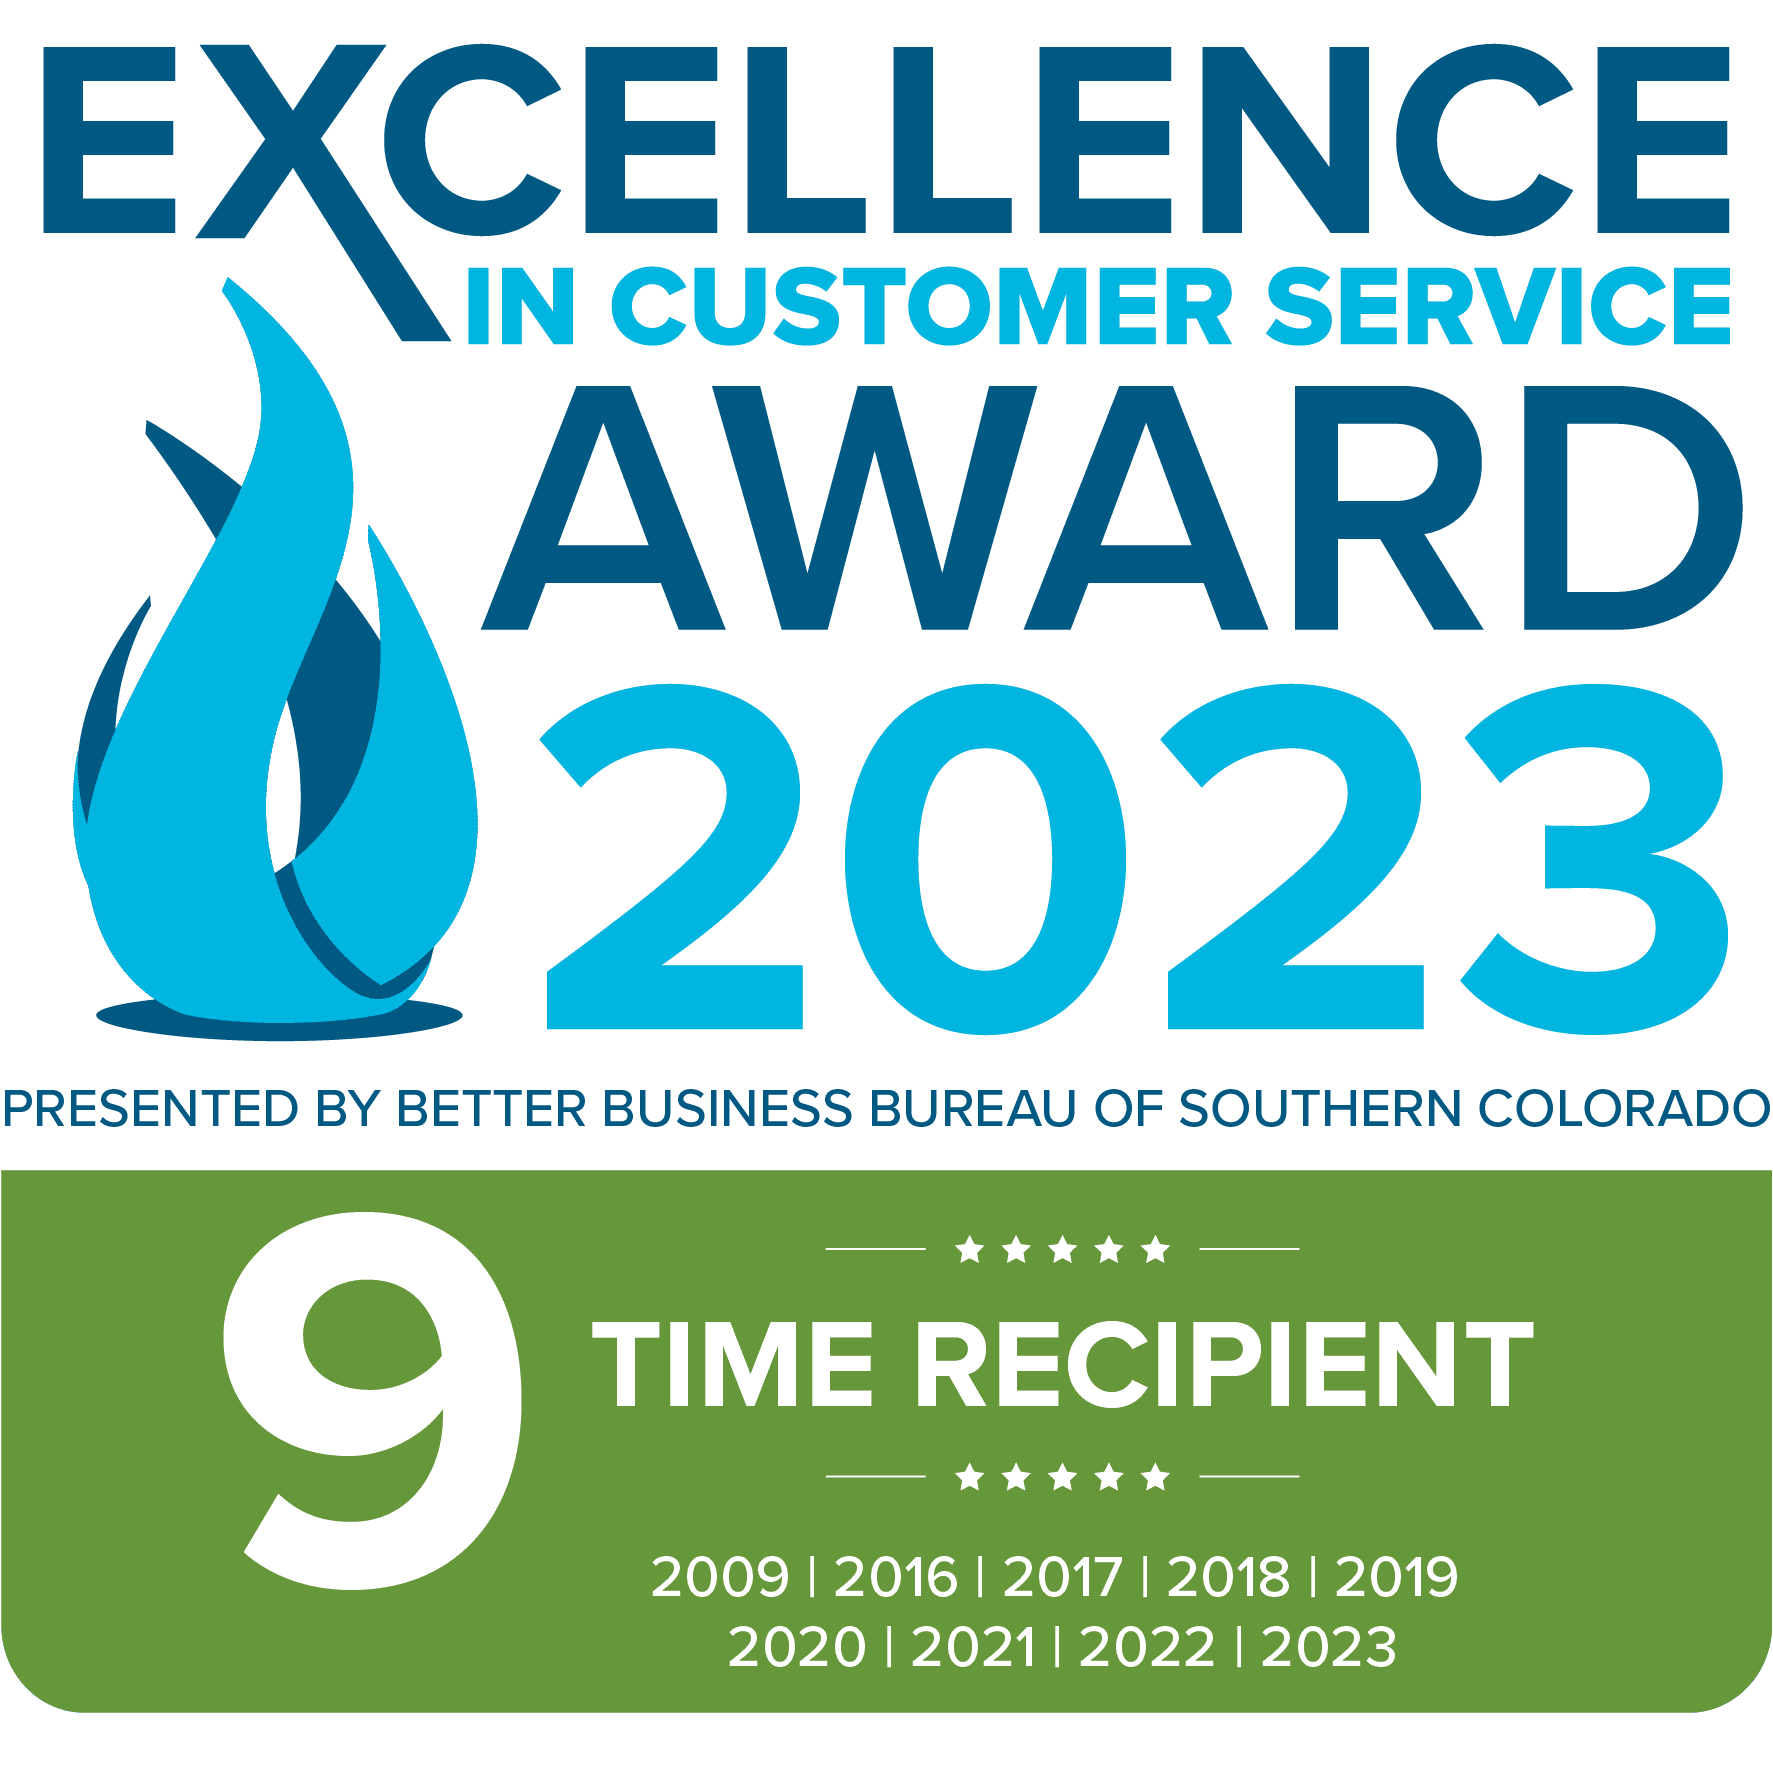 WireNut is the first 9x recipient of the Excellence in Customer Service Award